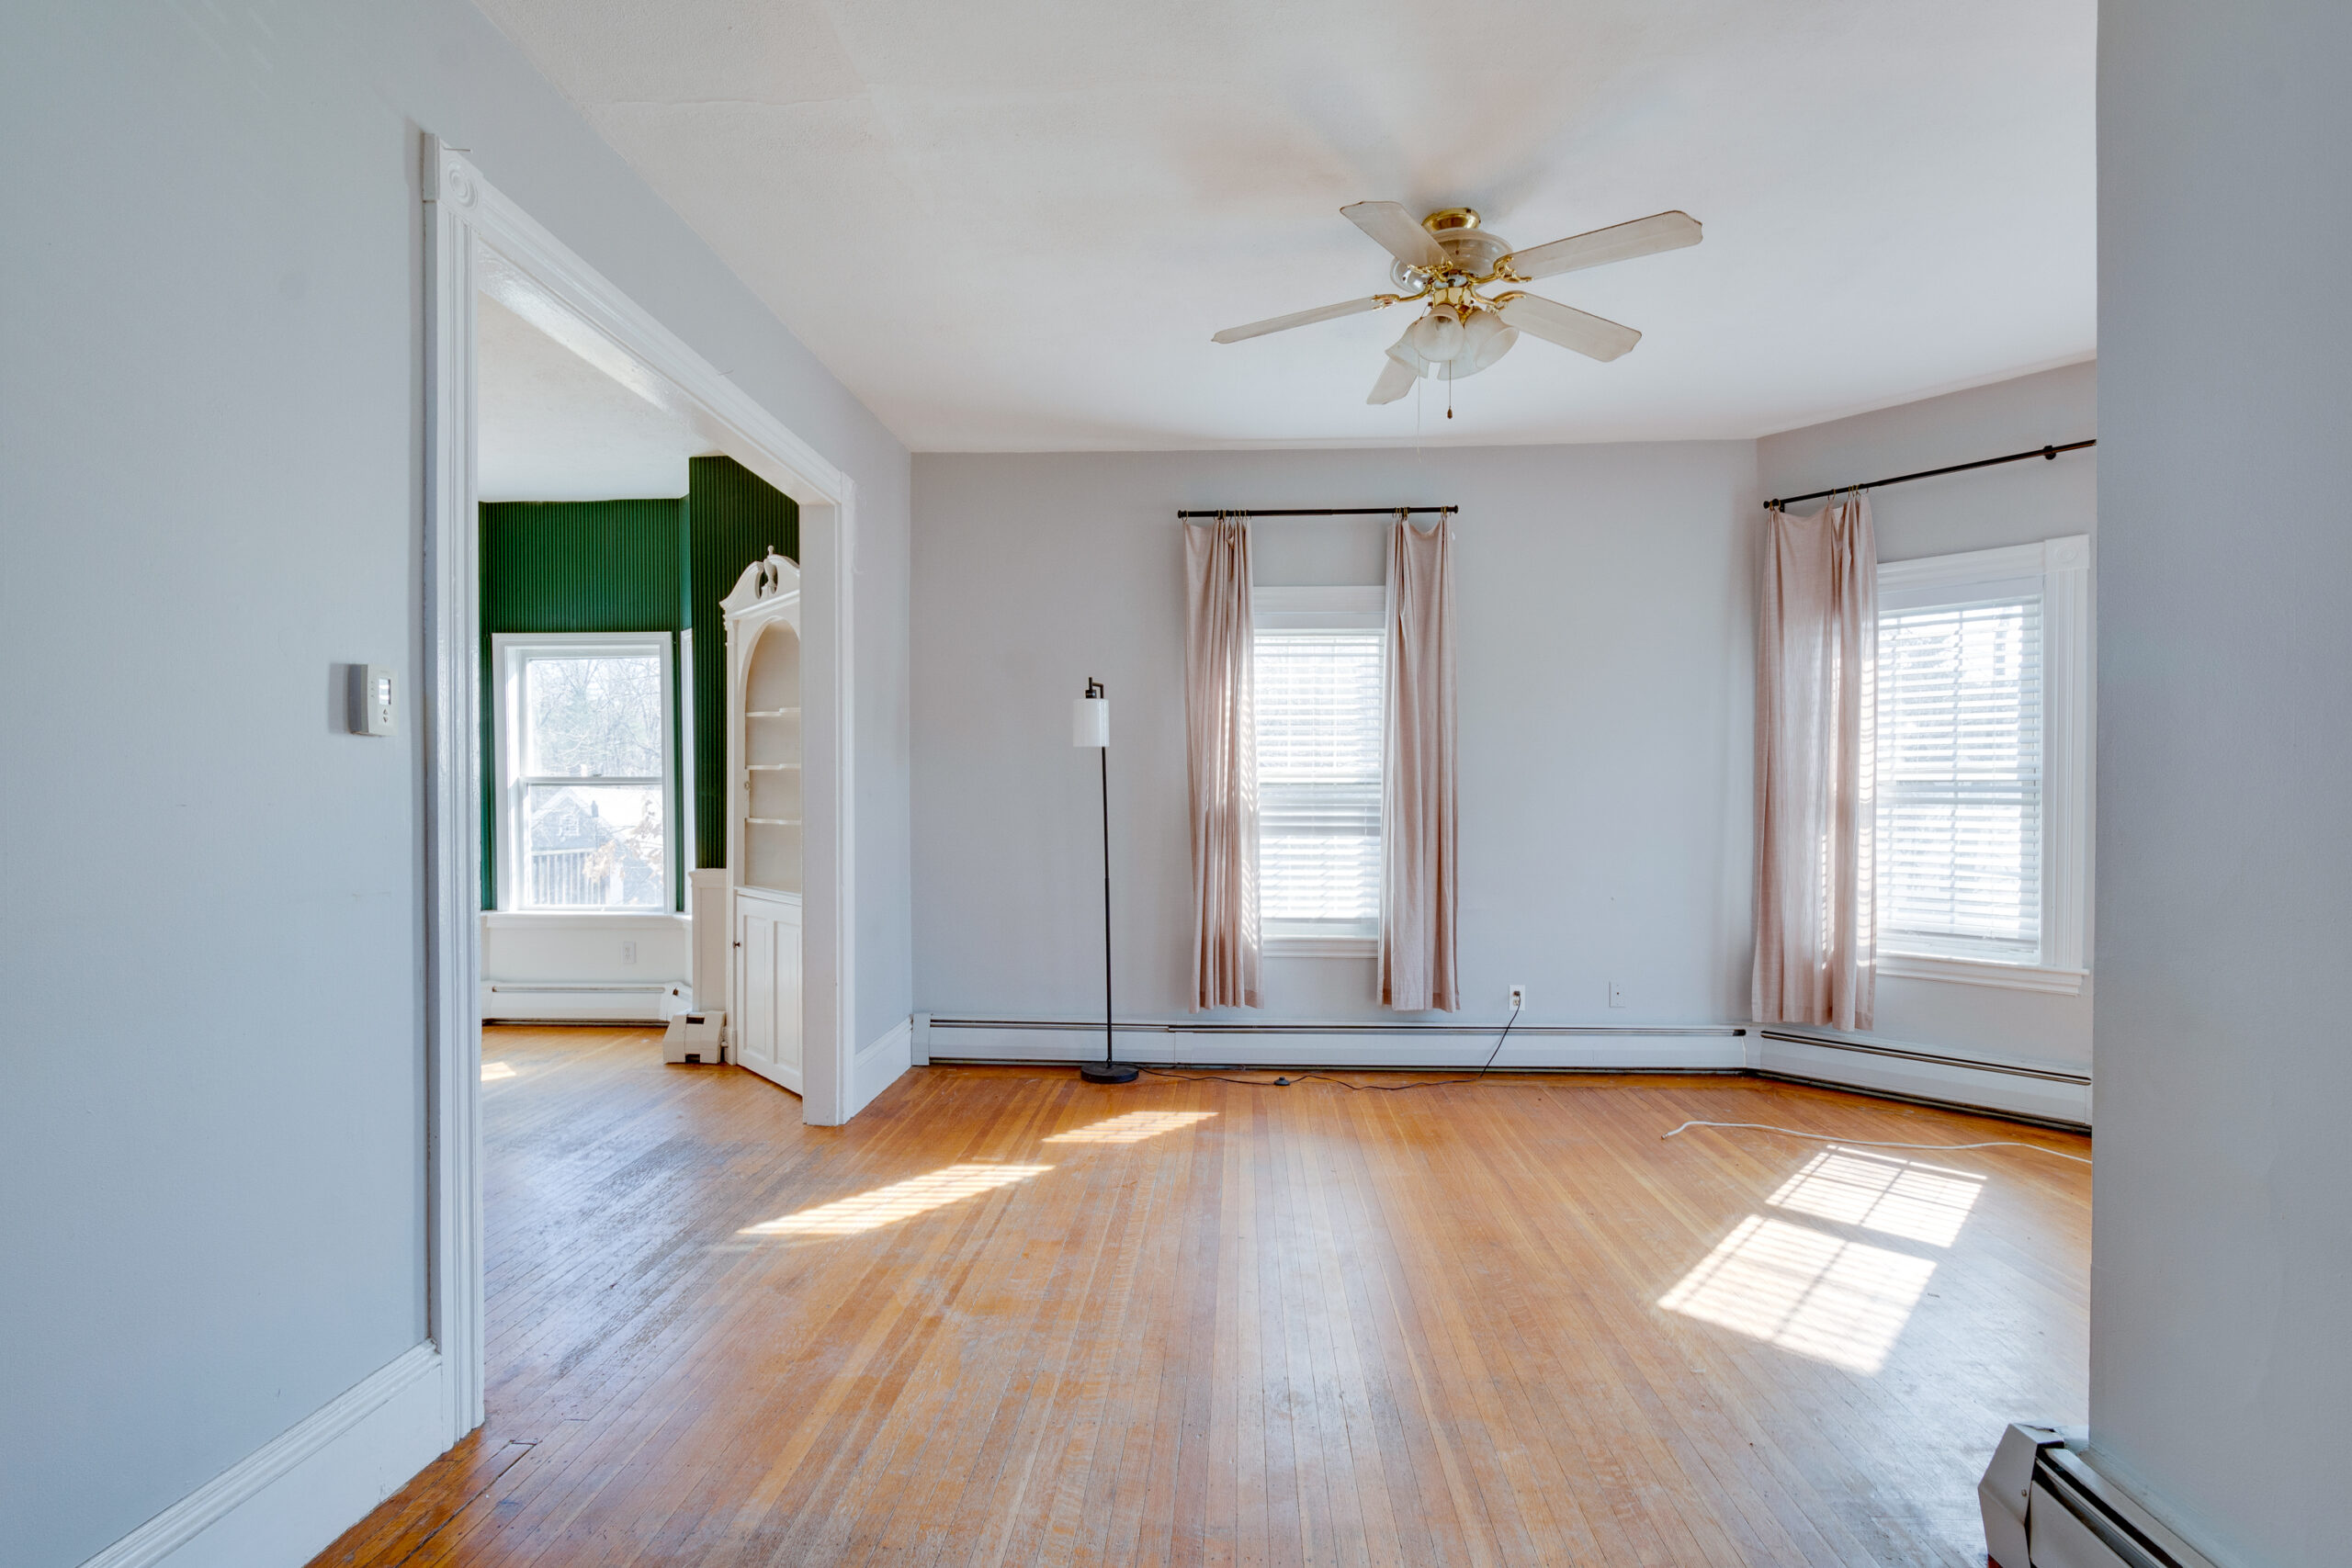 Image of a vintage New England living room before renovation. The room features large windows with pink curtains, outdated light grey walls, and worn hardwood floors. A ceiling fan with outdated lighting and a floor lamp contribute to the room's dated appearance. The space, with its traditional wood trim and baseboard heating, reflects the home's historical charm.